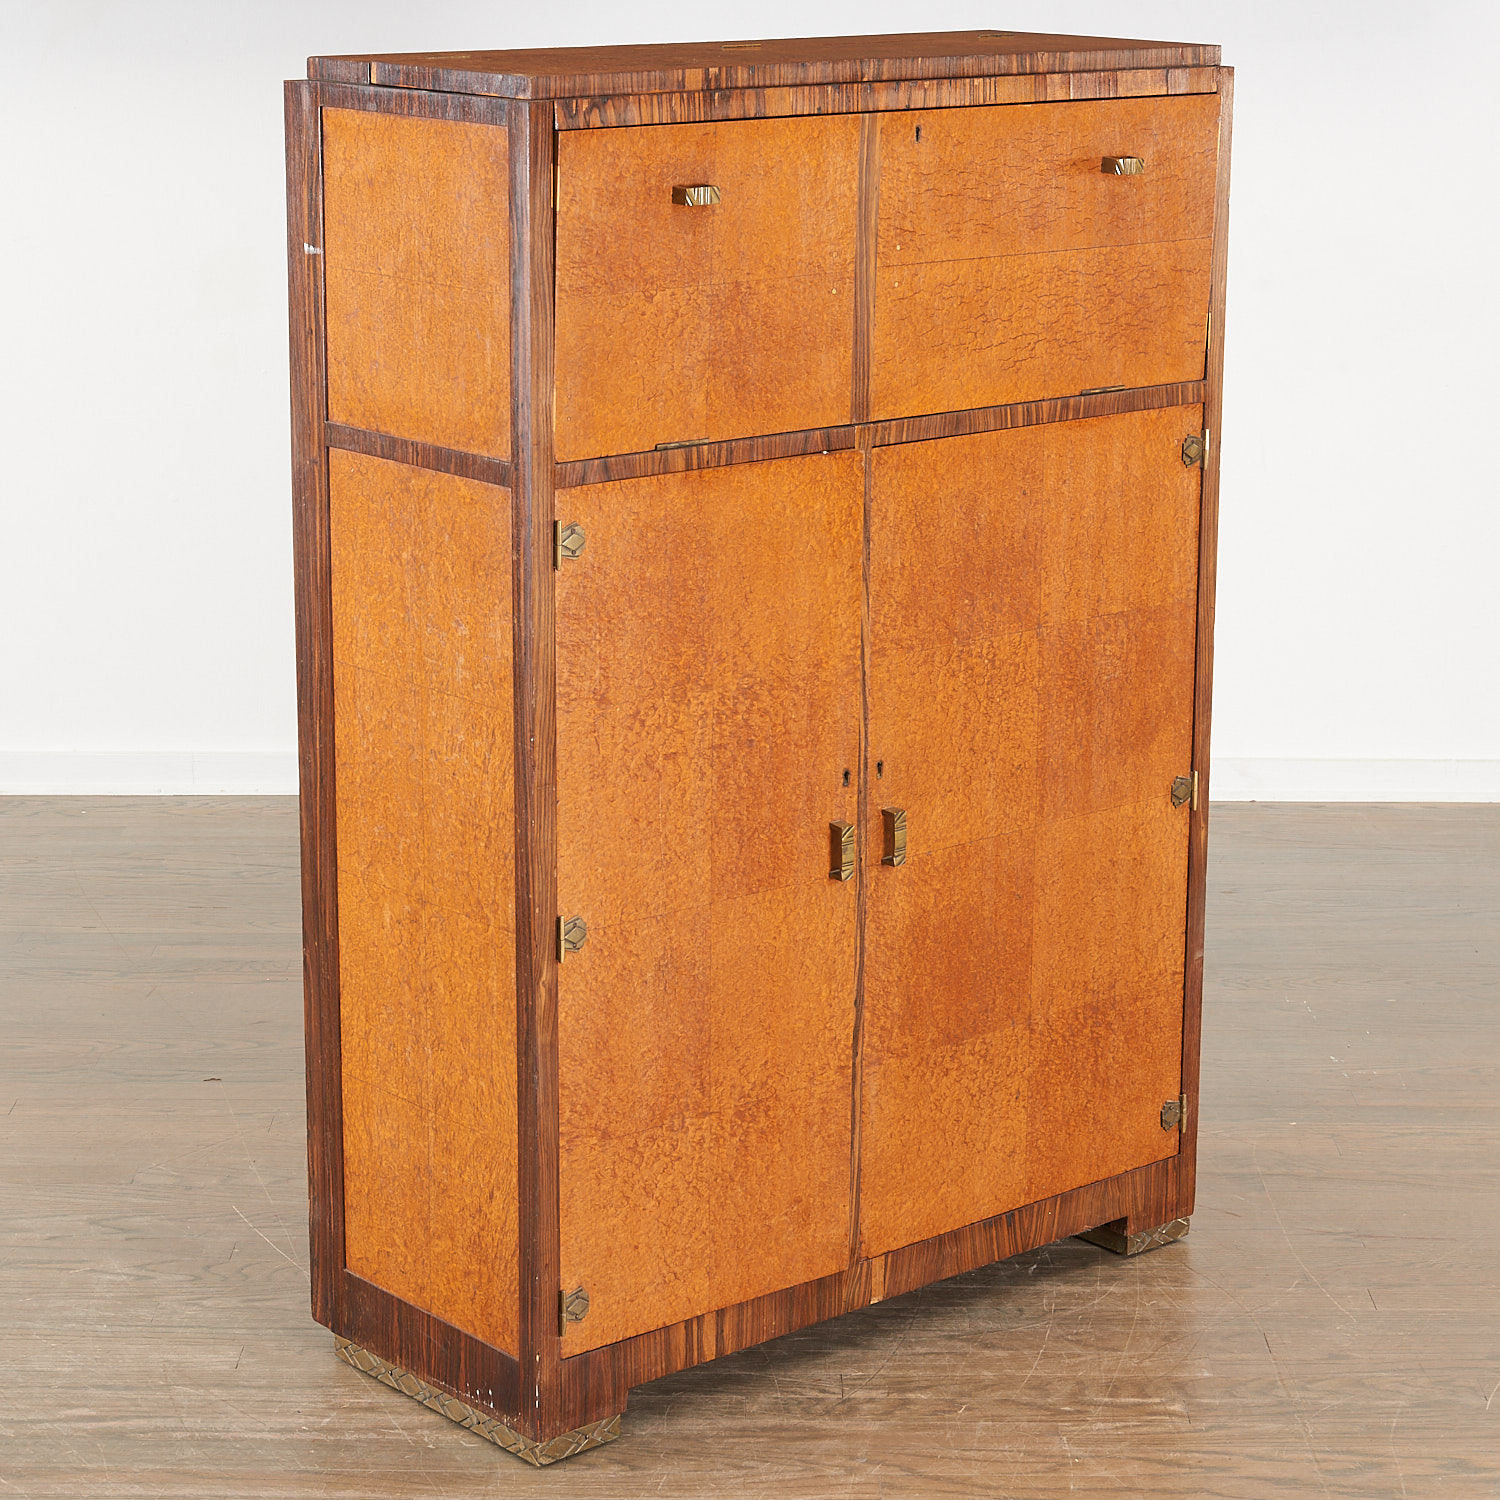 ENGLISH ART DECO DRINKS CABINET 36277a